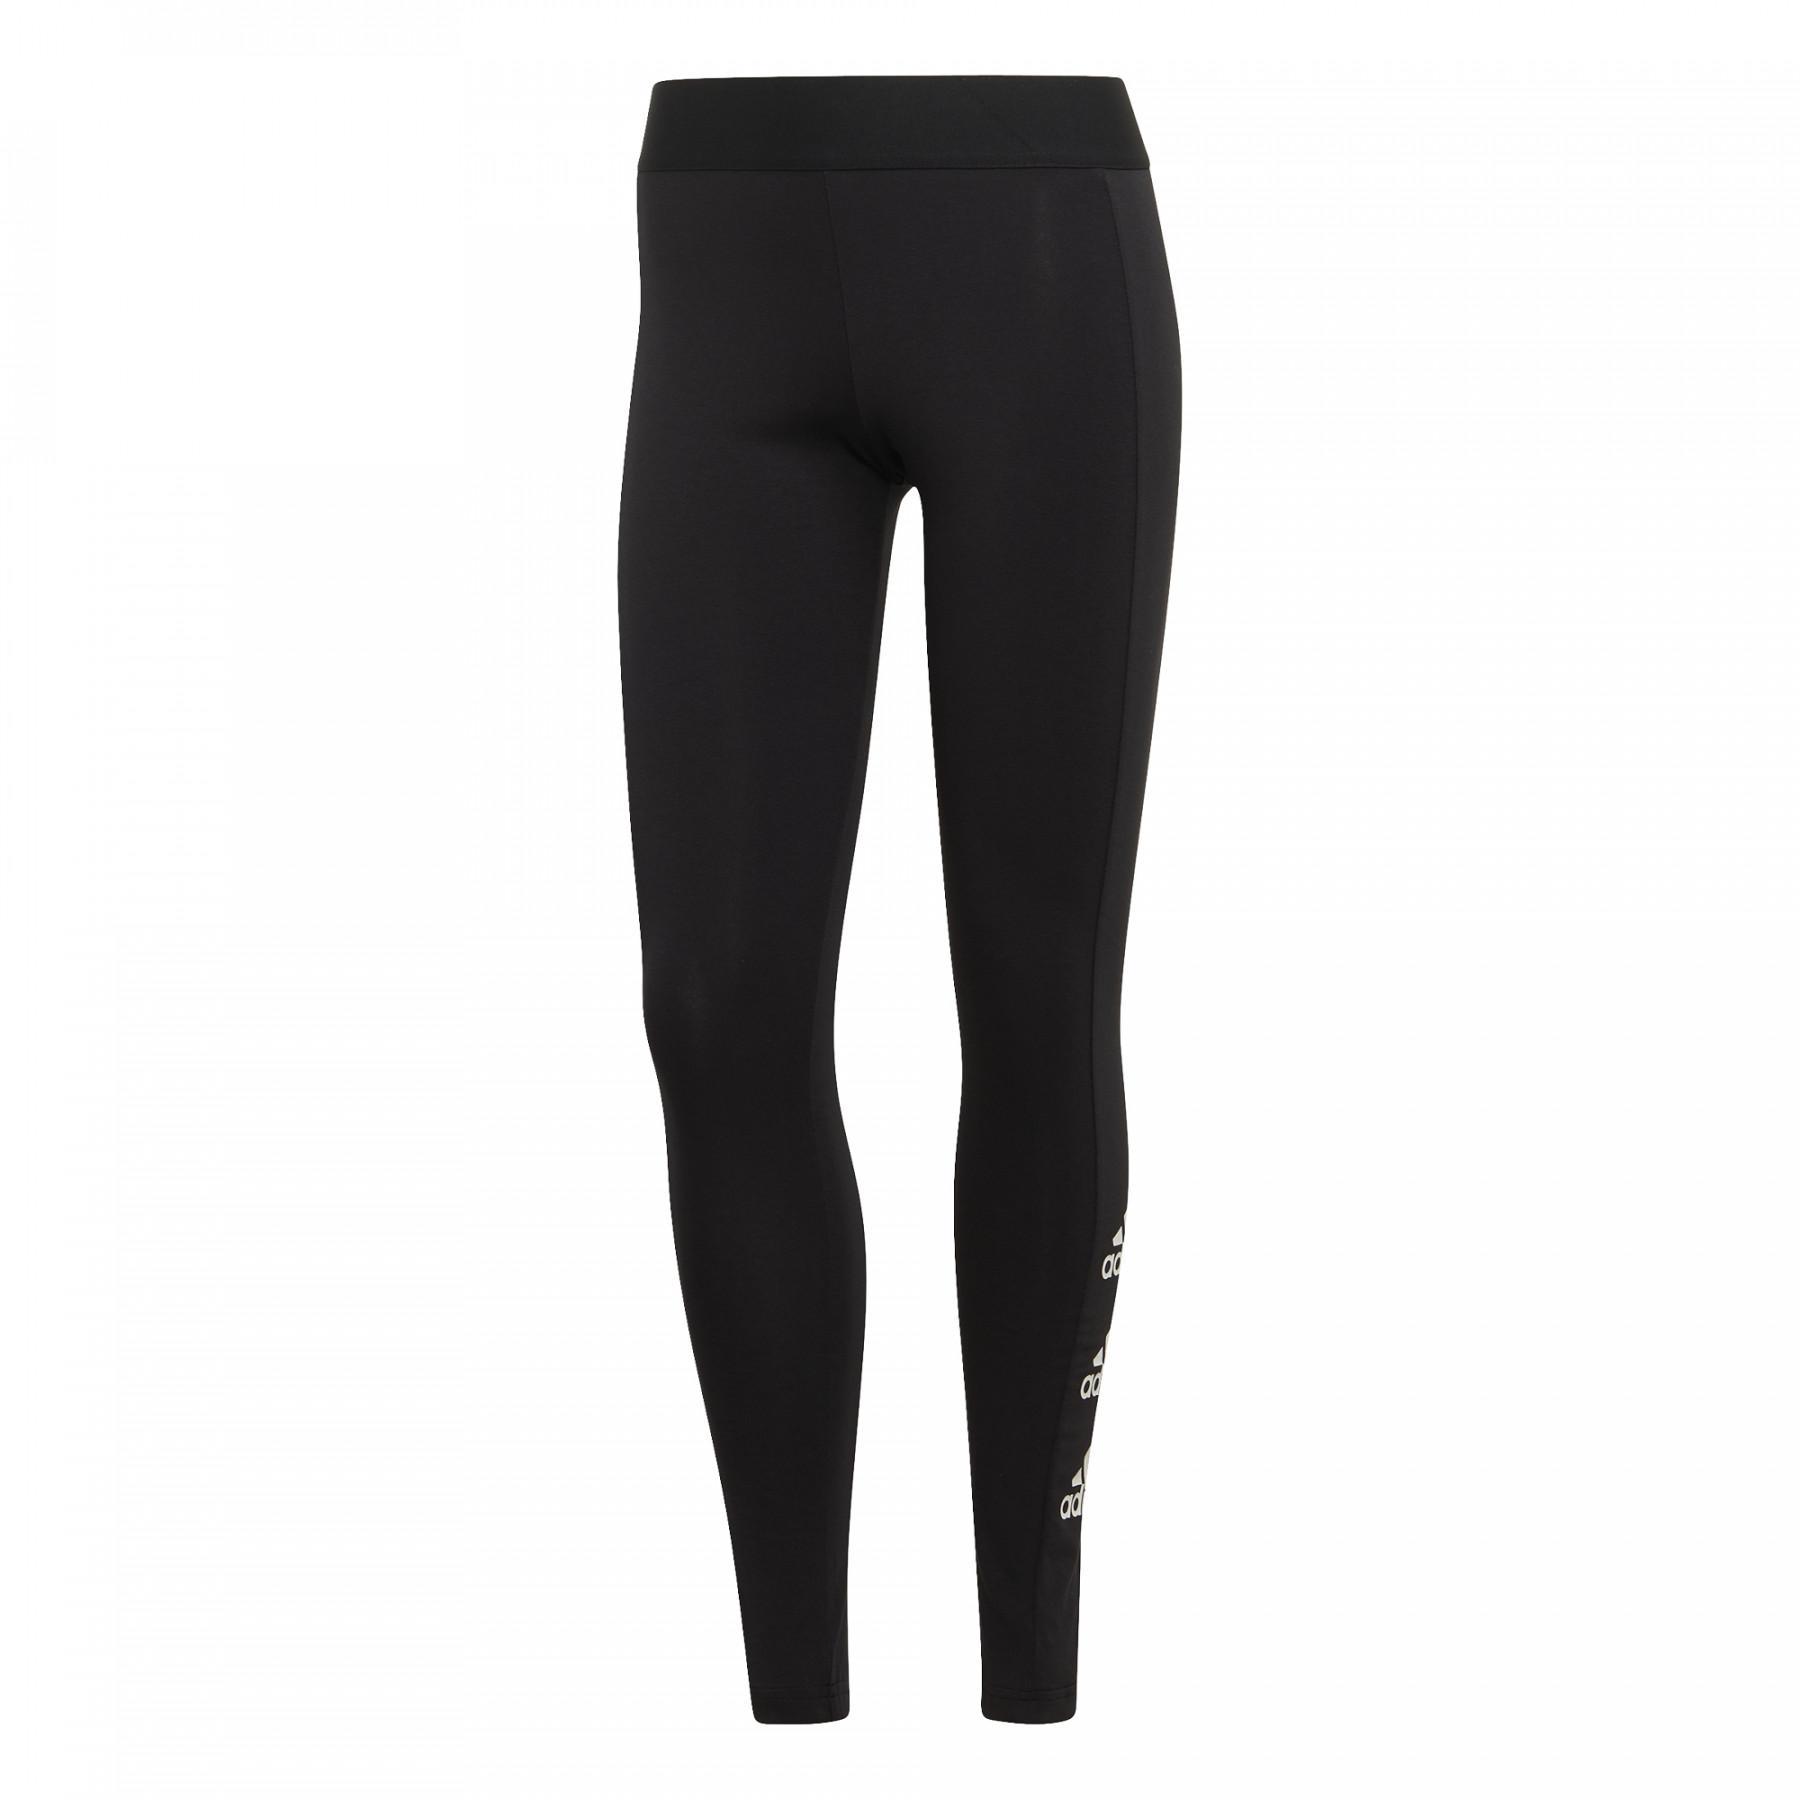 Legging woman adidas Must Haves Stacked Logo